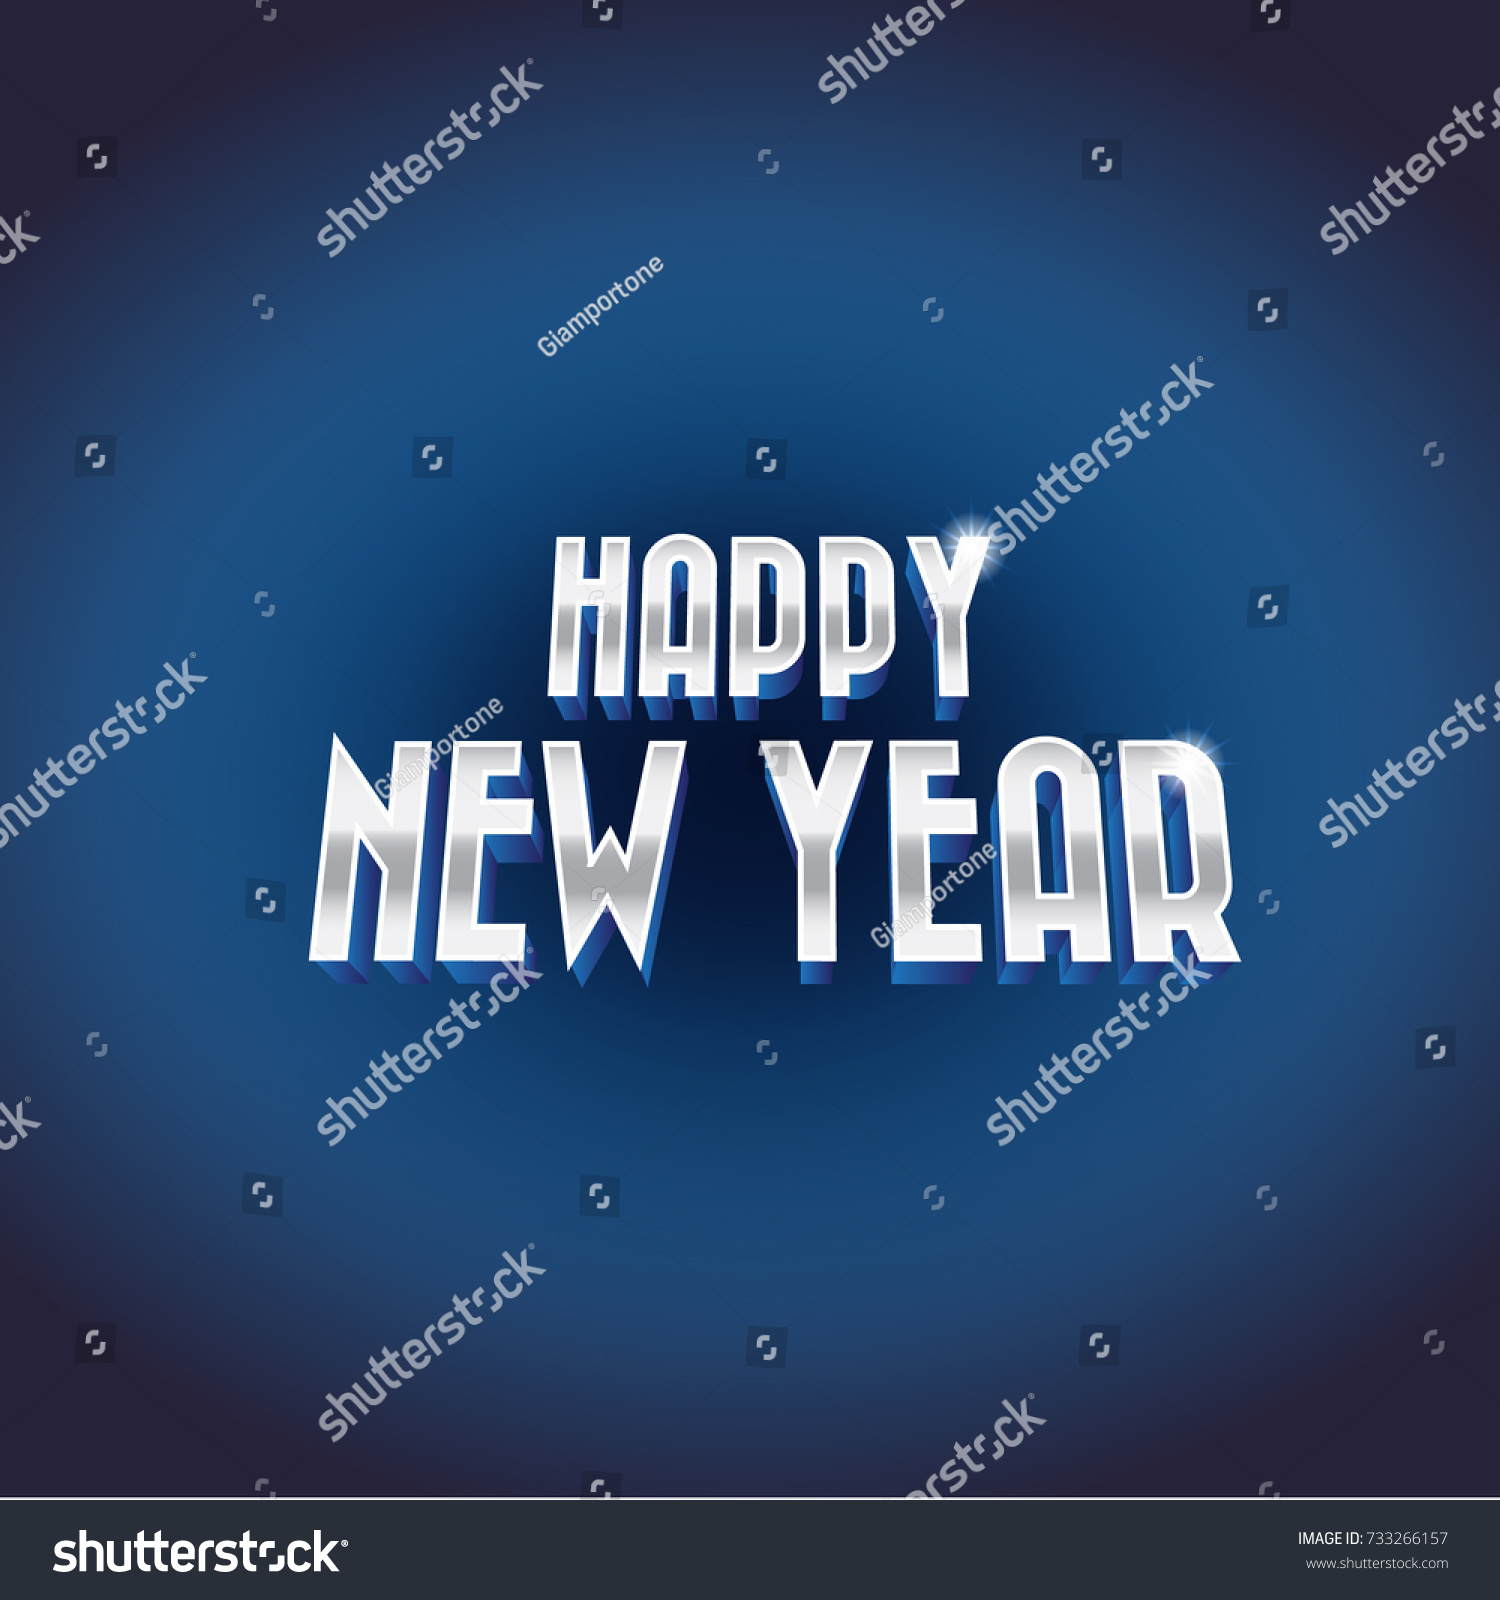 Happy New Year 3d Silver Text Stock Vector (Royalty Free) 733266157